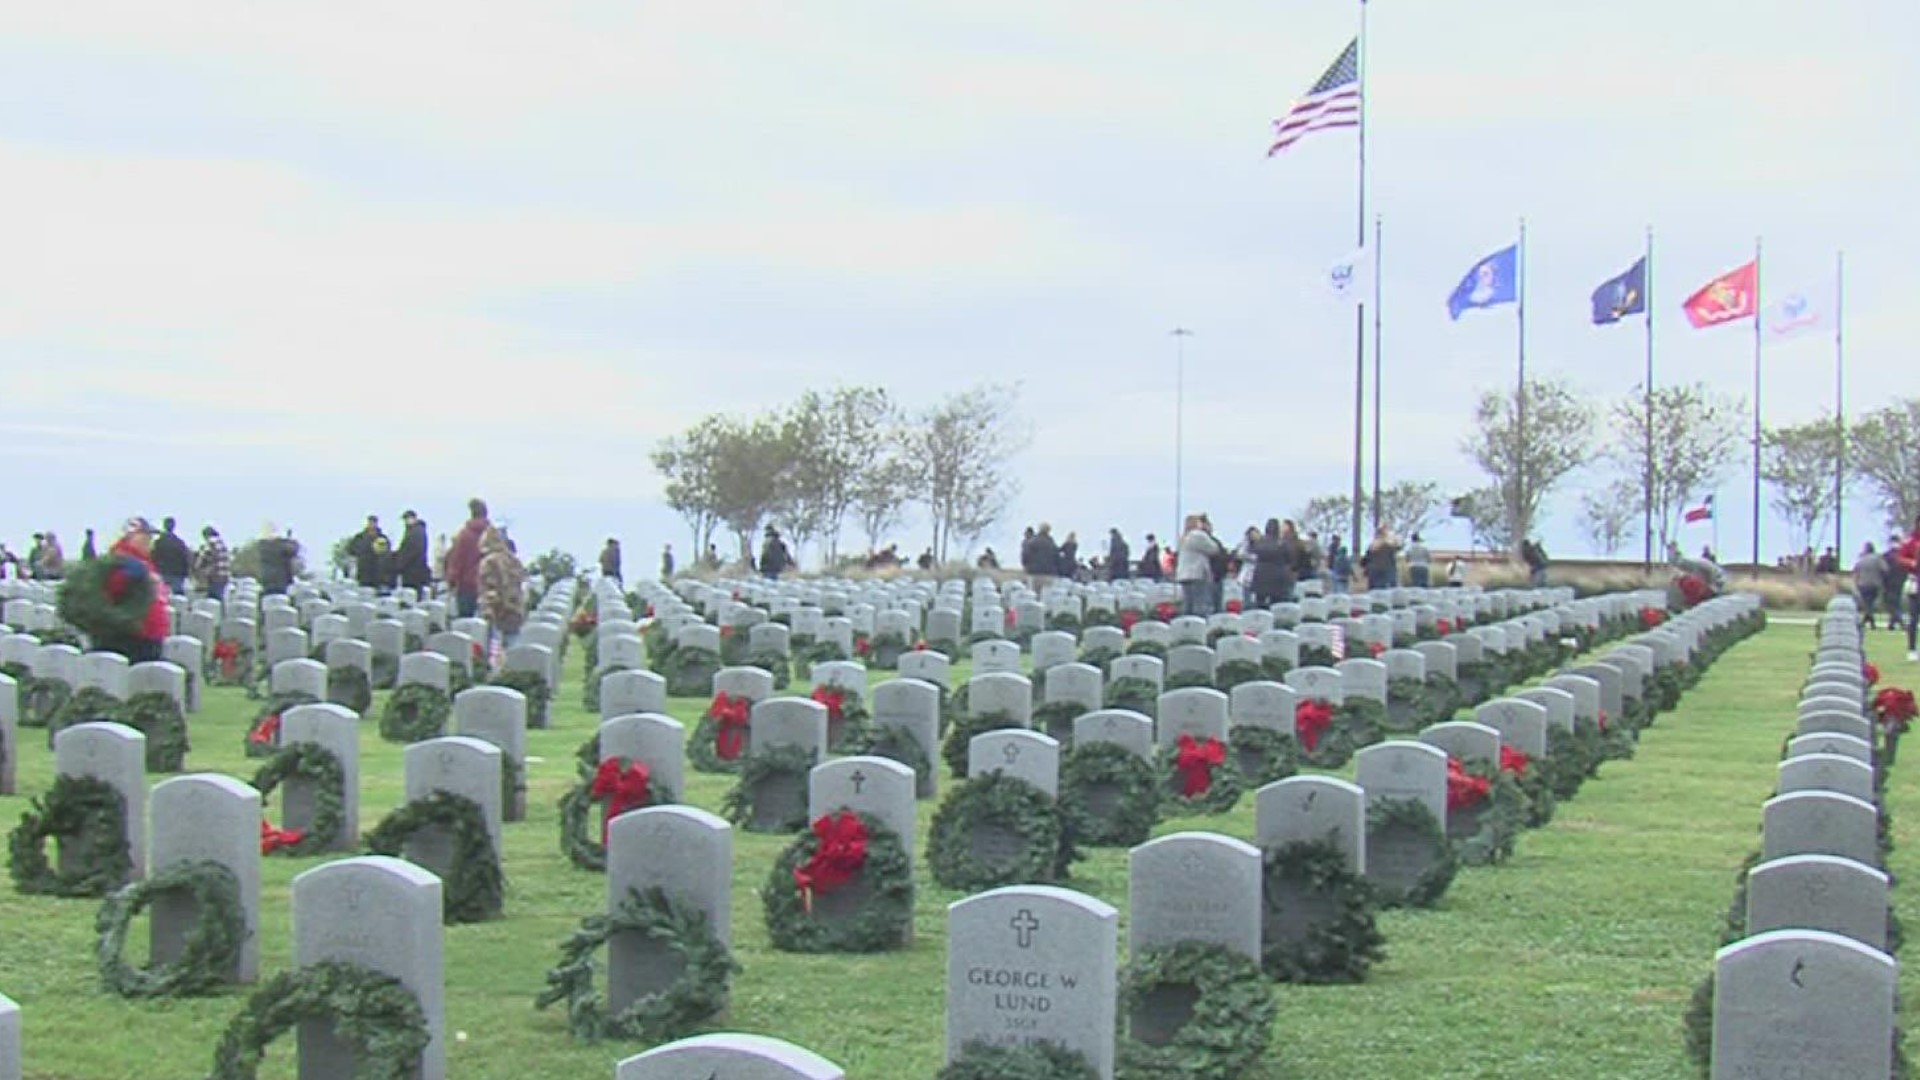 Earlier this month many laid out thousands of Christmas wreaths for our nation's heroes. Now volunteers are needed to put them back in storage.